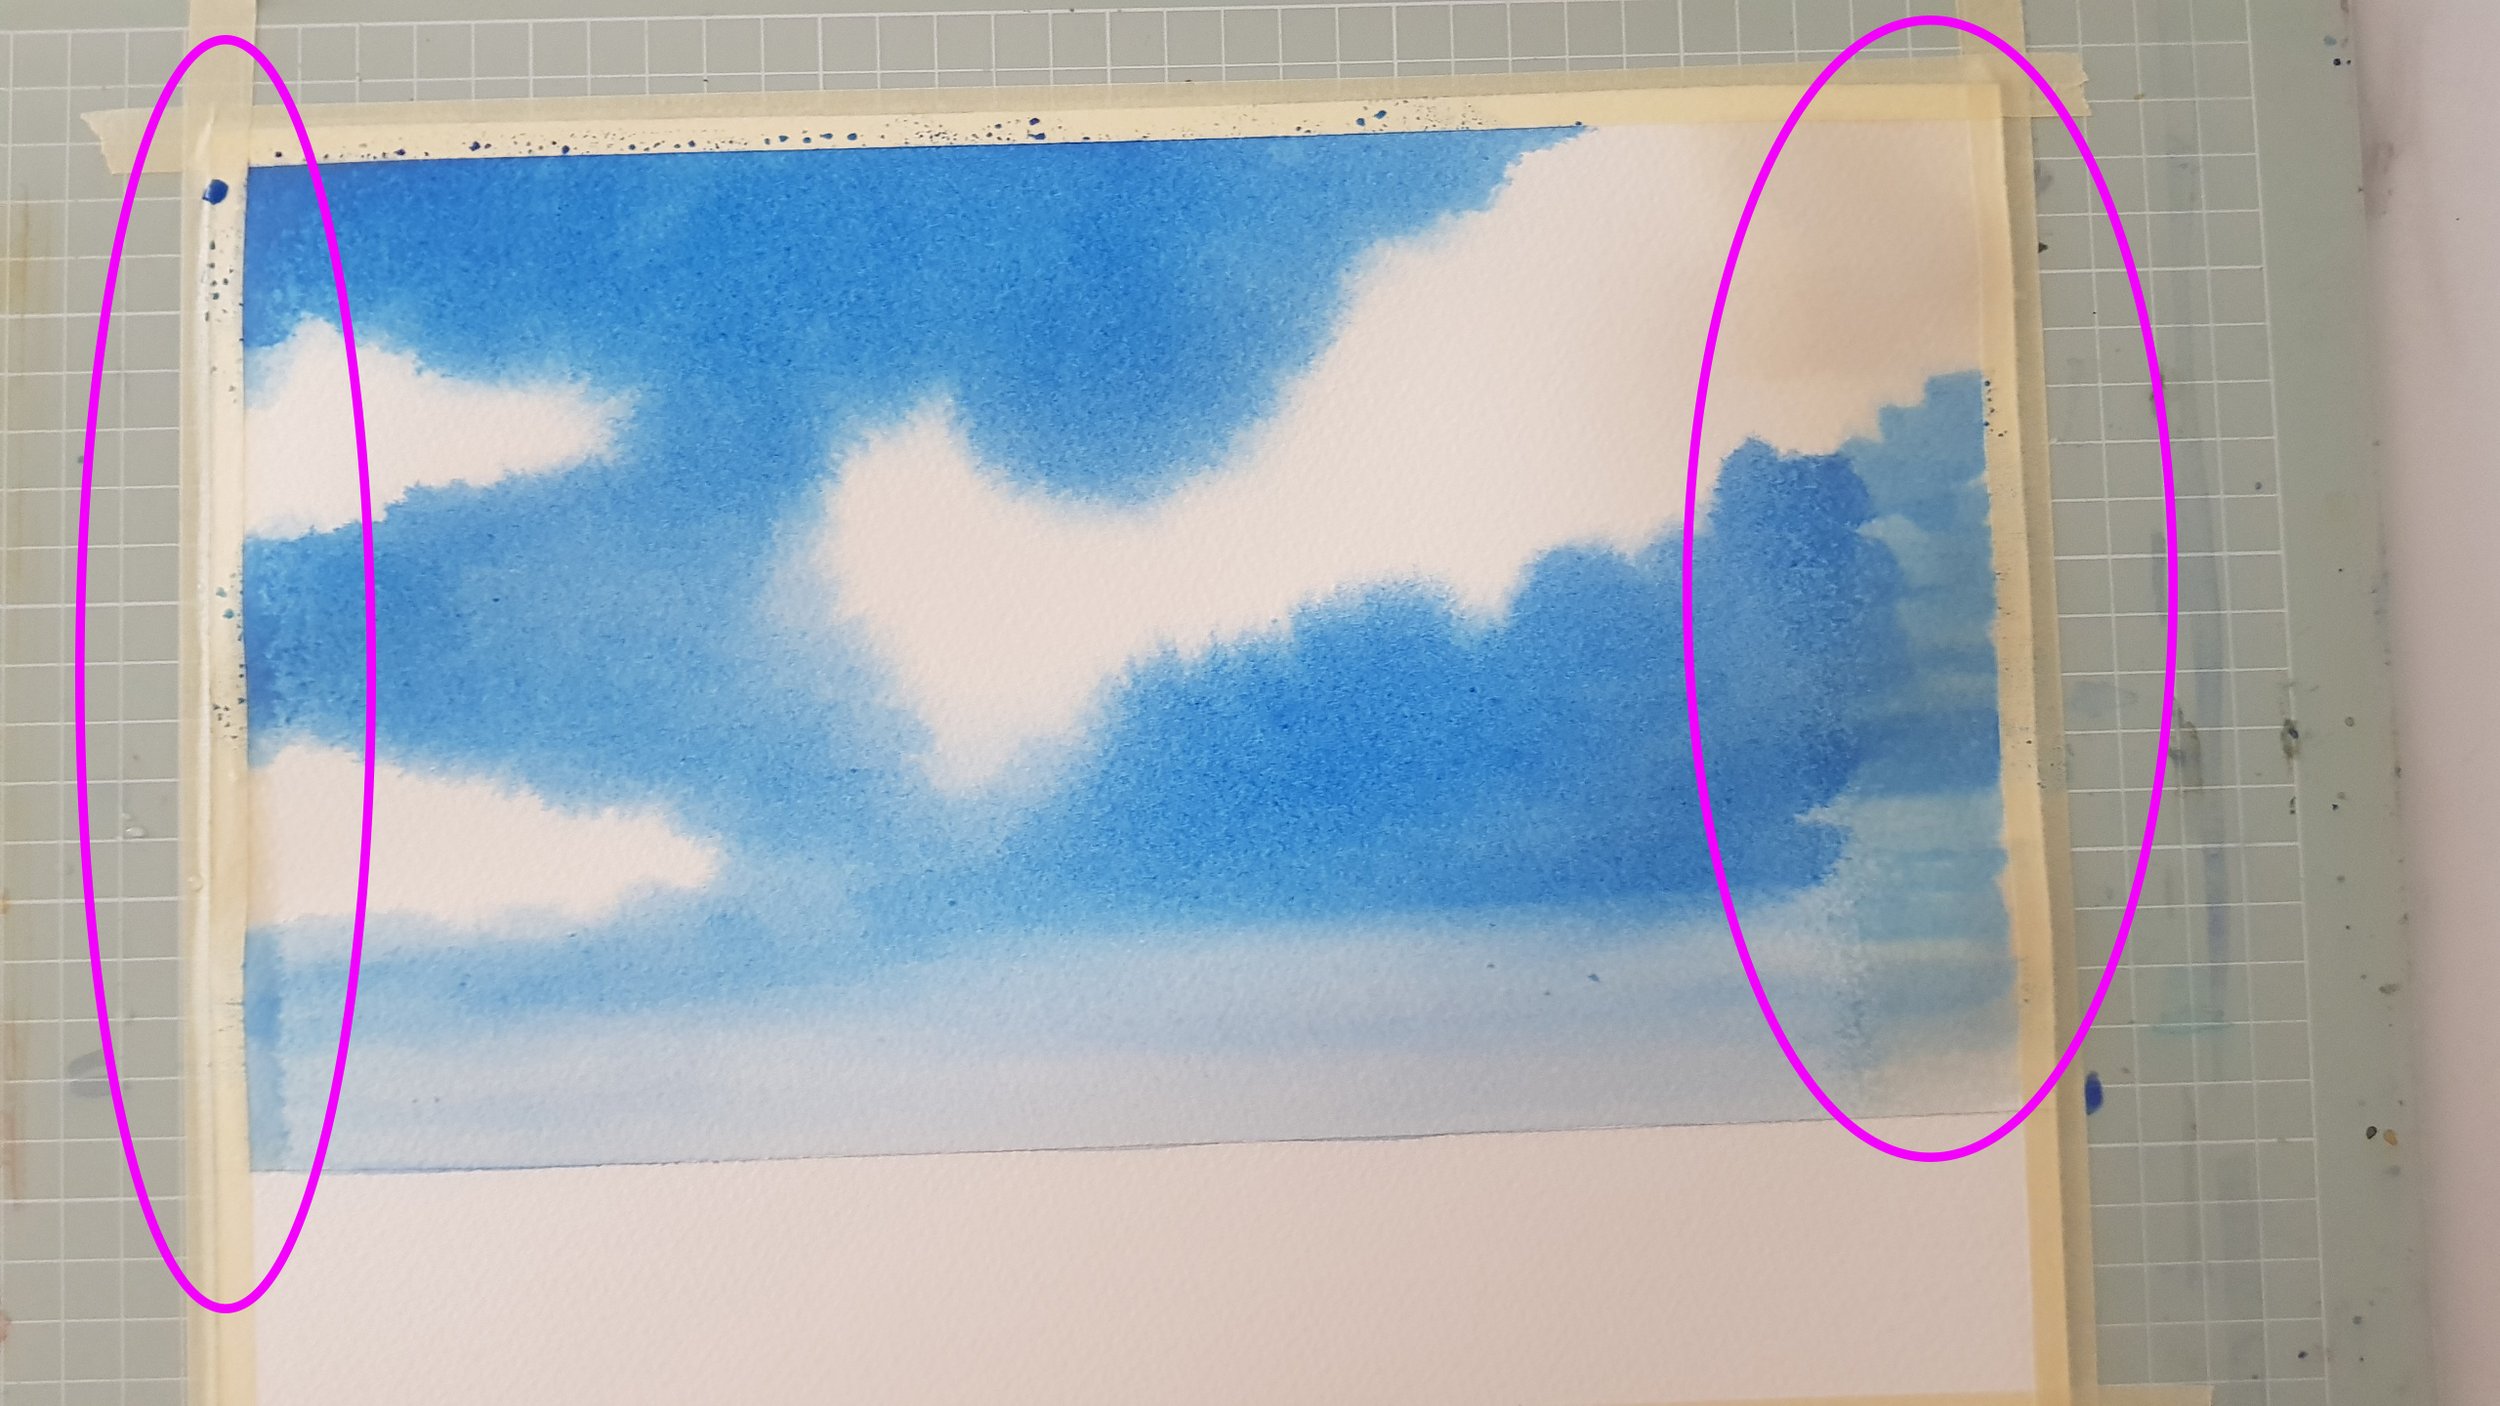 Watercolor Paper Gone Bad - paint and water sinking into the paper. Colors look muted. Yellowing of the paper. Water moves sideways under the masking tape.